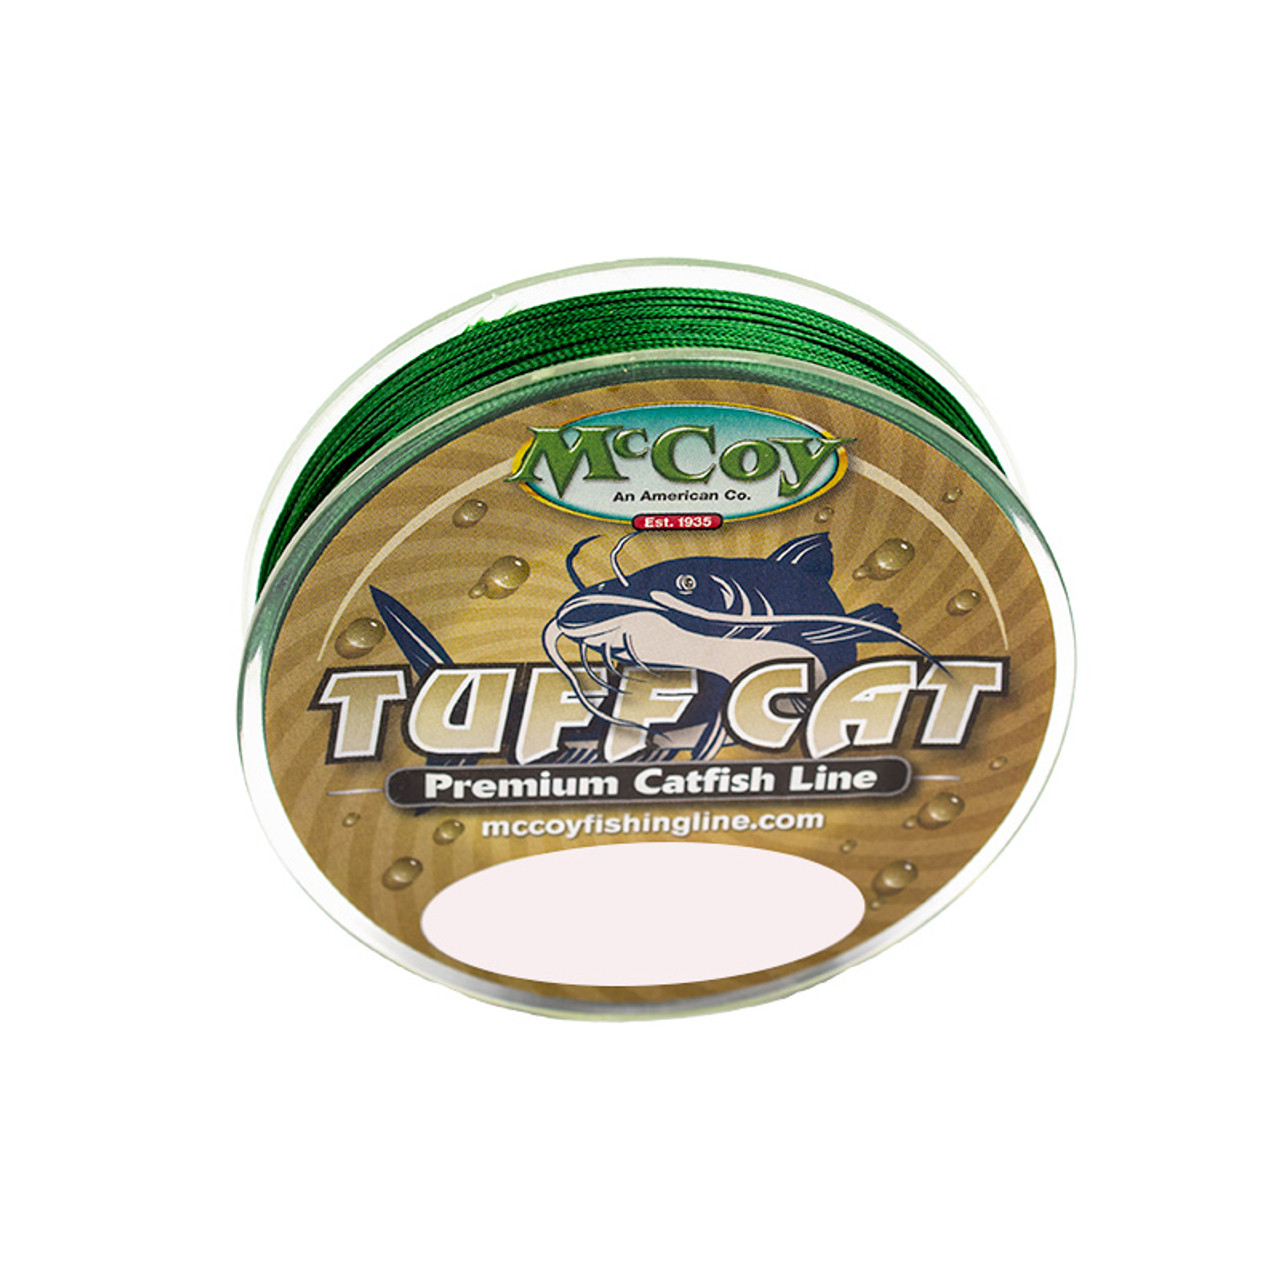 Catfish Line in Monofilament Fishing Line for sale